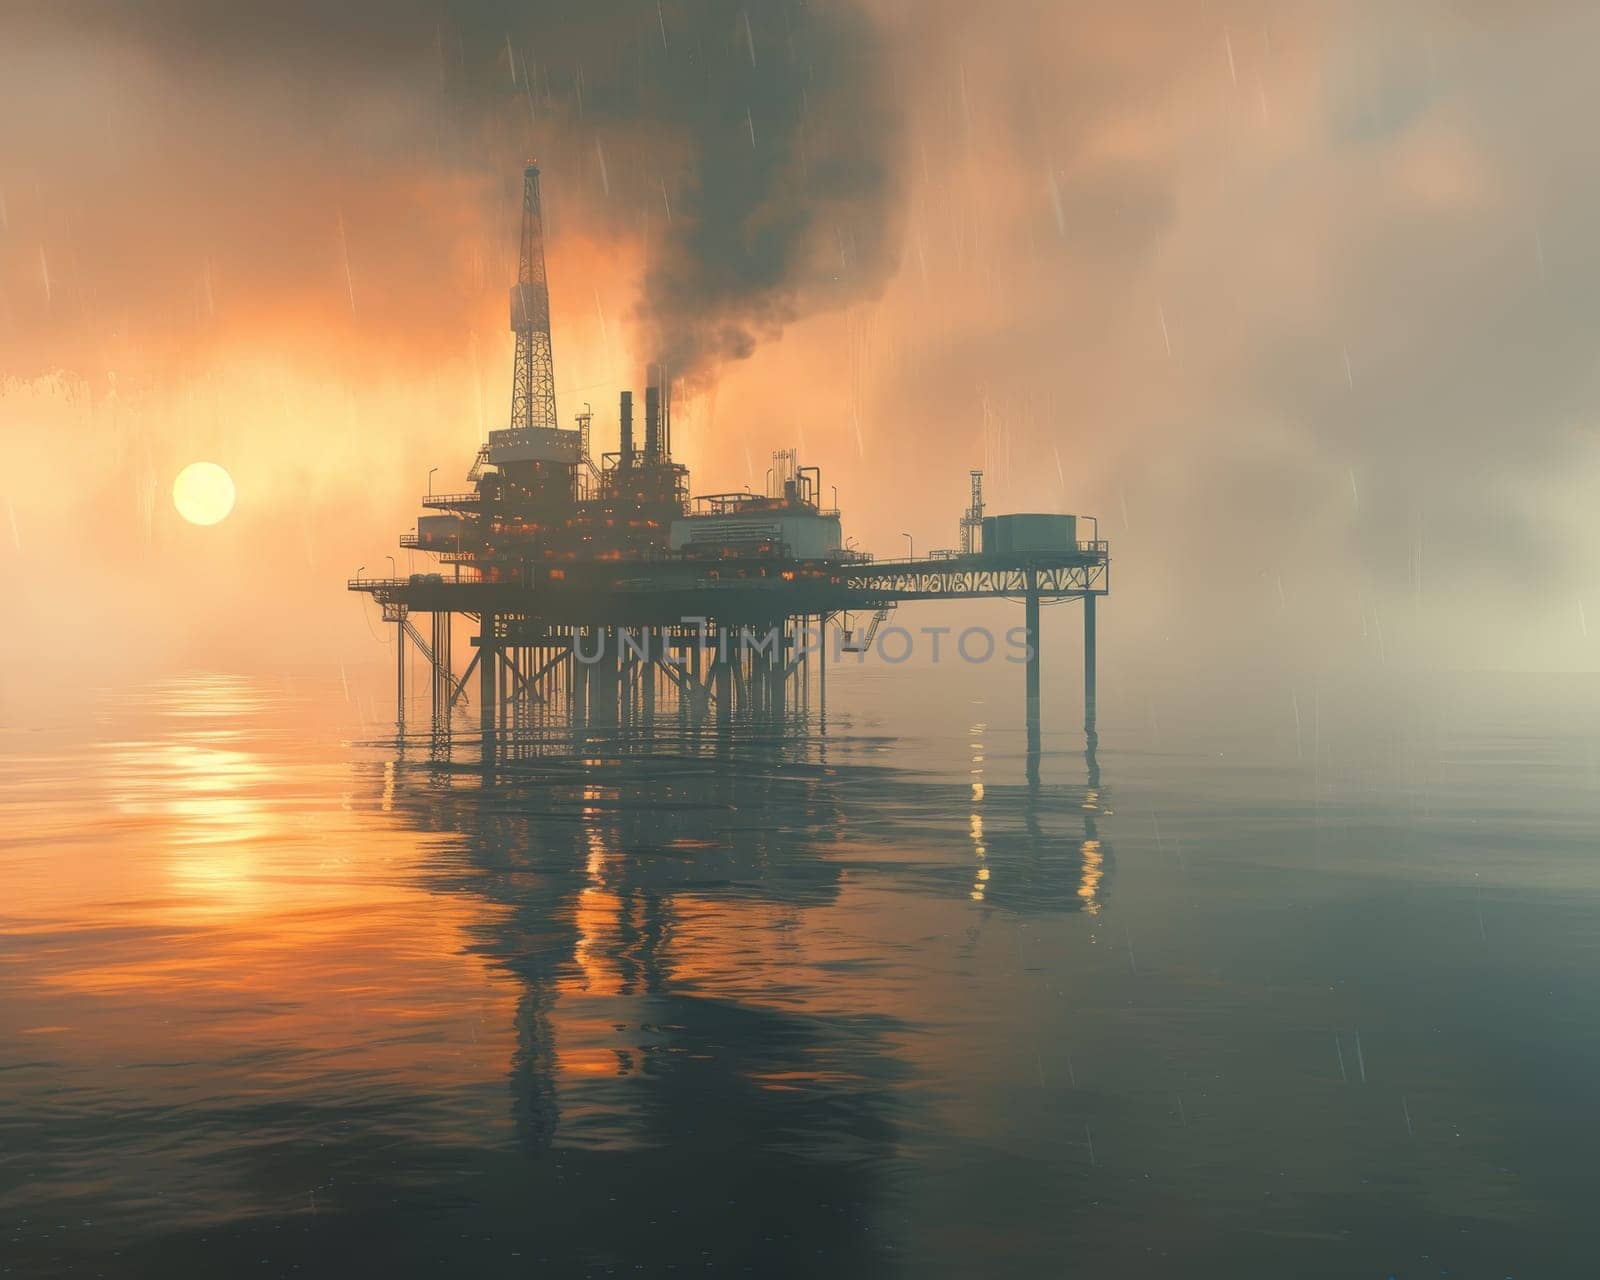 Offshore drilling rig in the sea, captured in stunning orange hues during a dramatic sunset